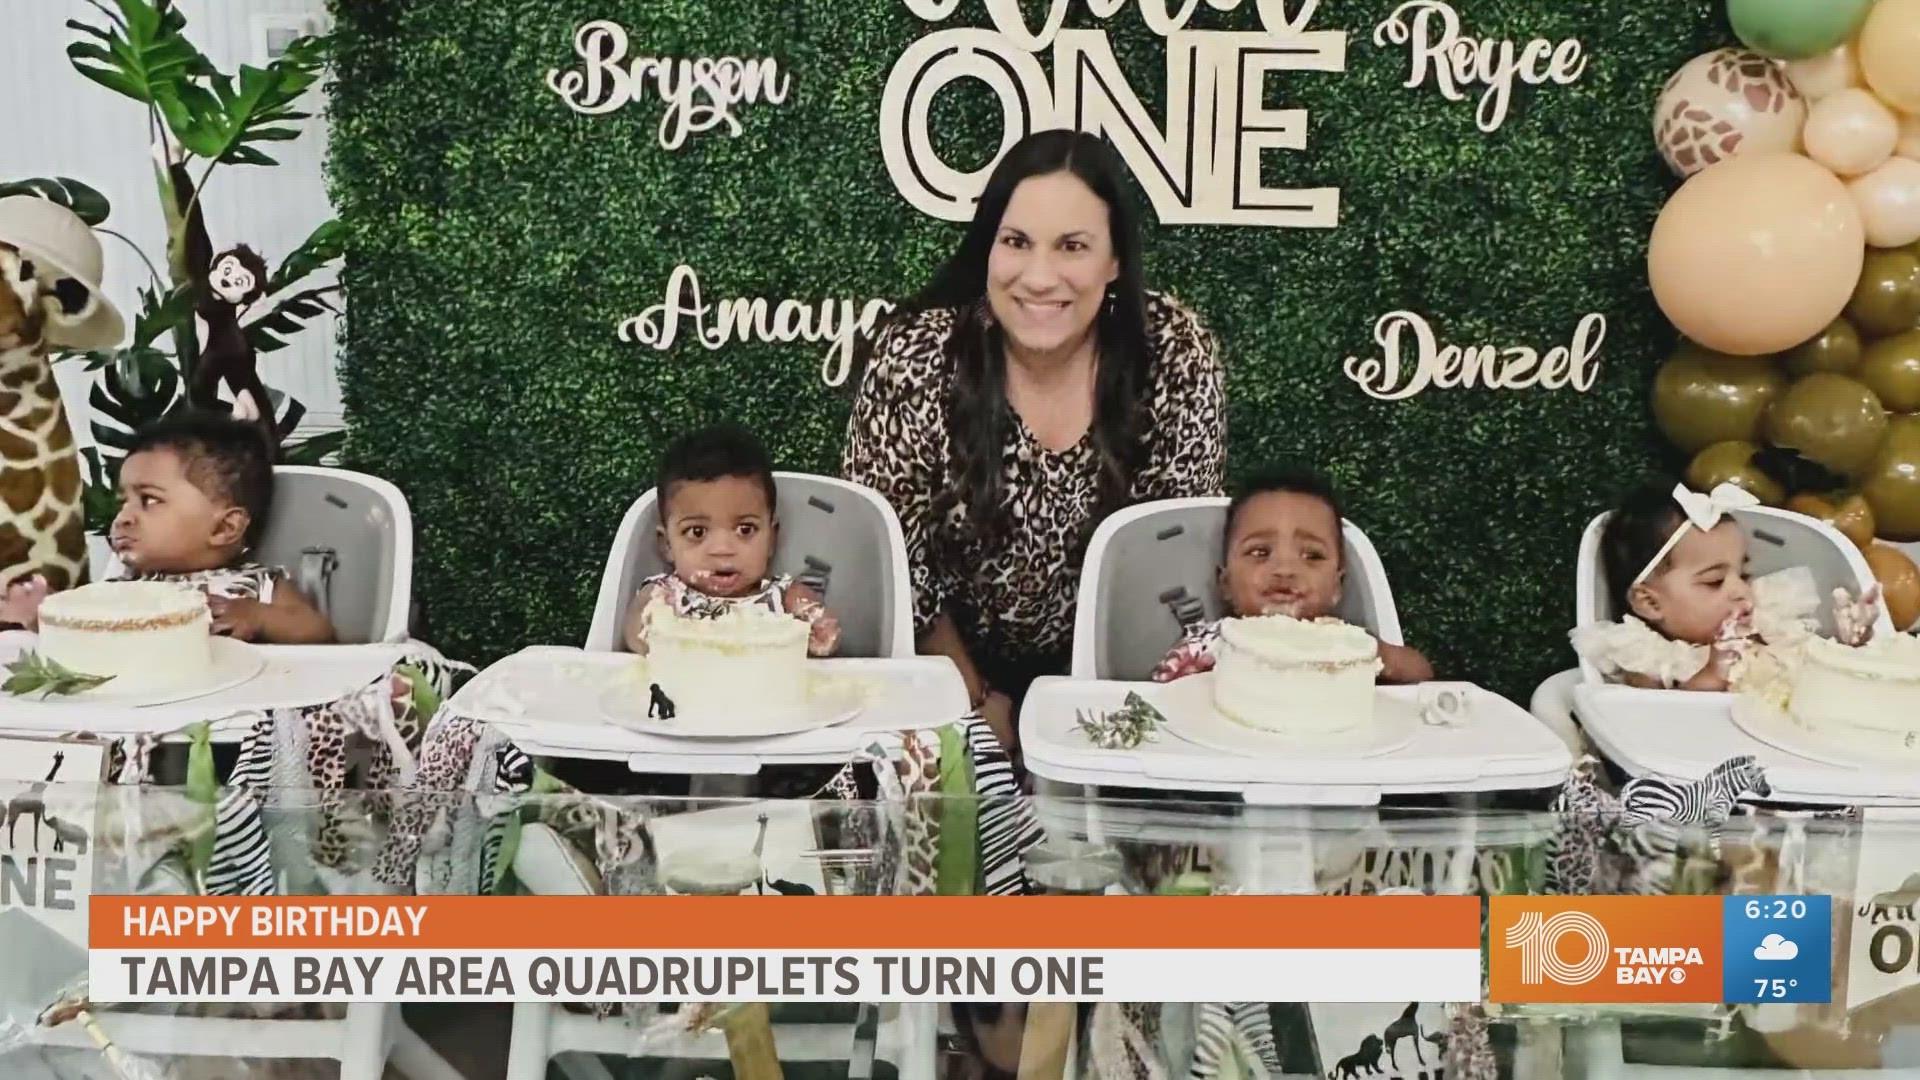 Their mom's gender reveal went viral last year. The quadruplets beat the odds of survival despite being born three months early.